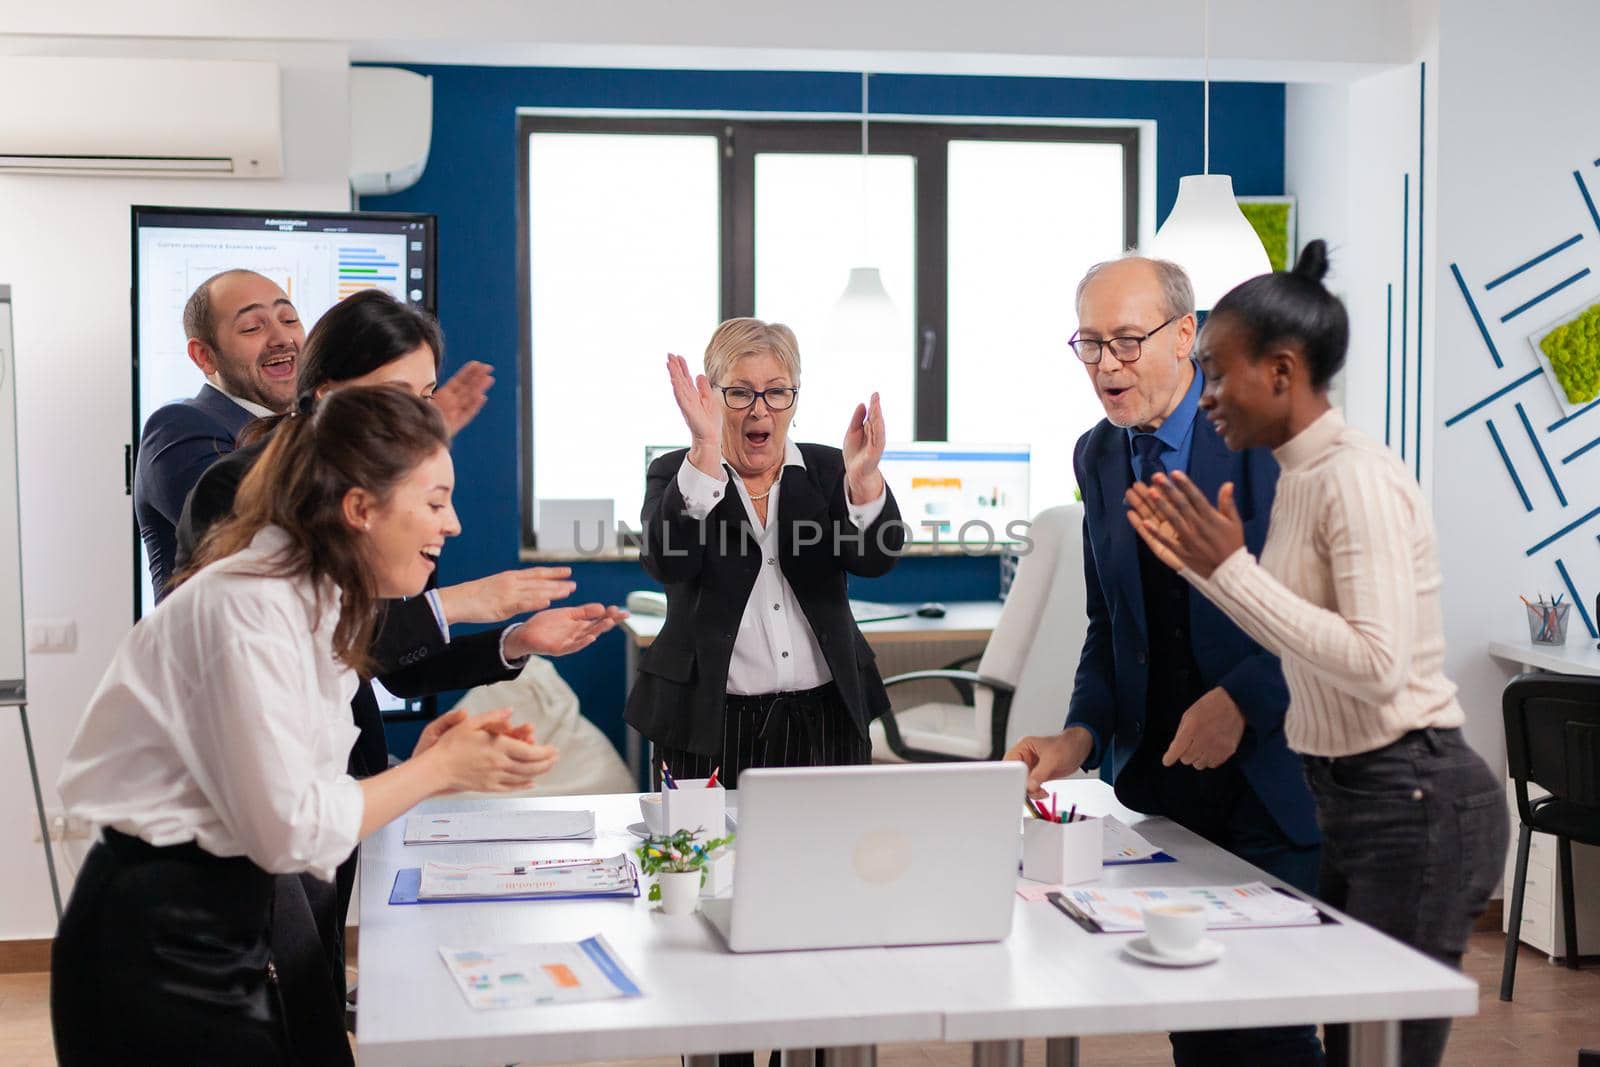 Diverse executive business team clapping in conference room during training. Multiethnical partners coworkers celebrate successful teamwork result at company briefing